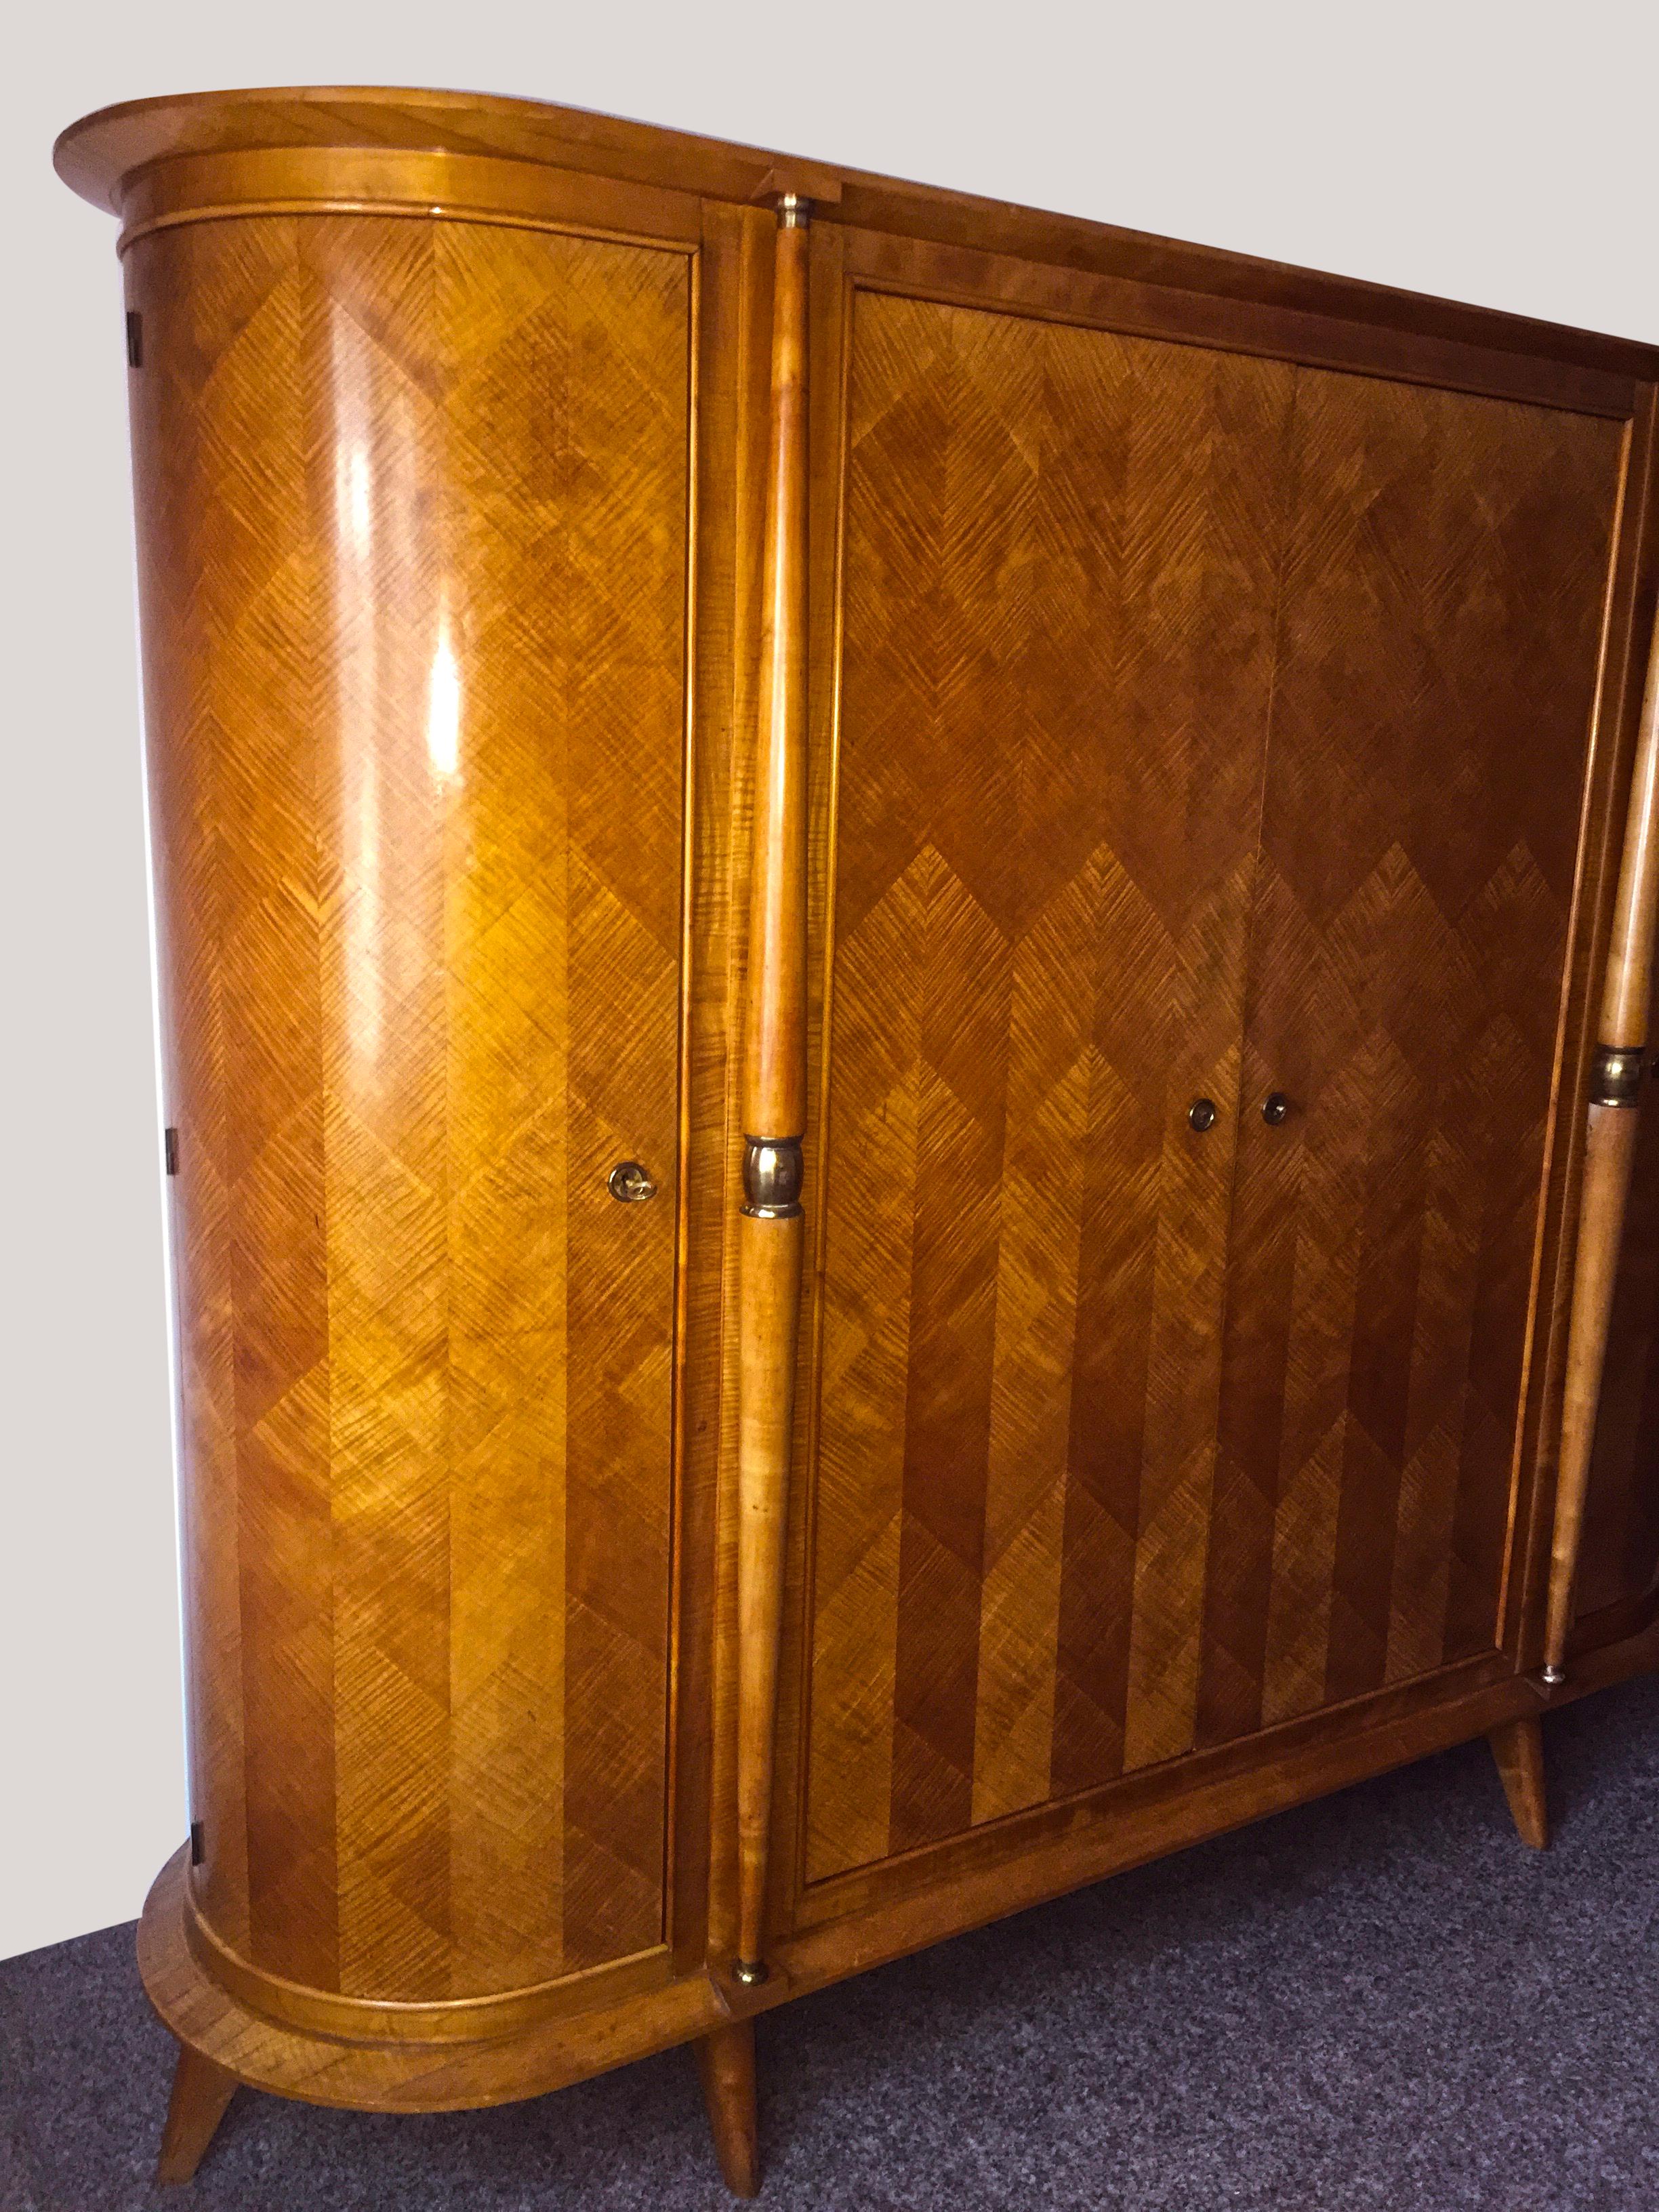 Veneer Rare as Design French Oval Art Deco Sycamore Armoire, 1940s For Sale